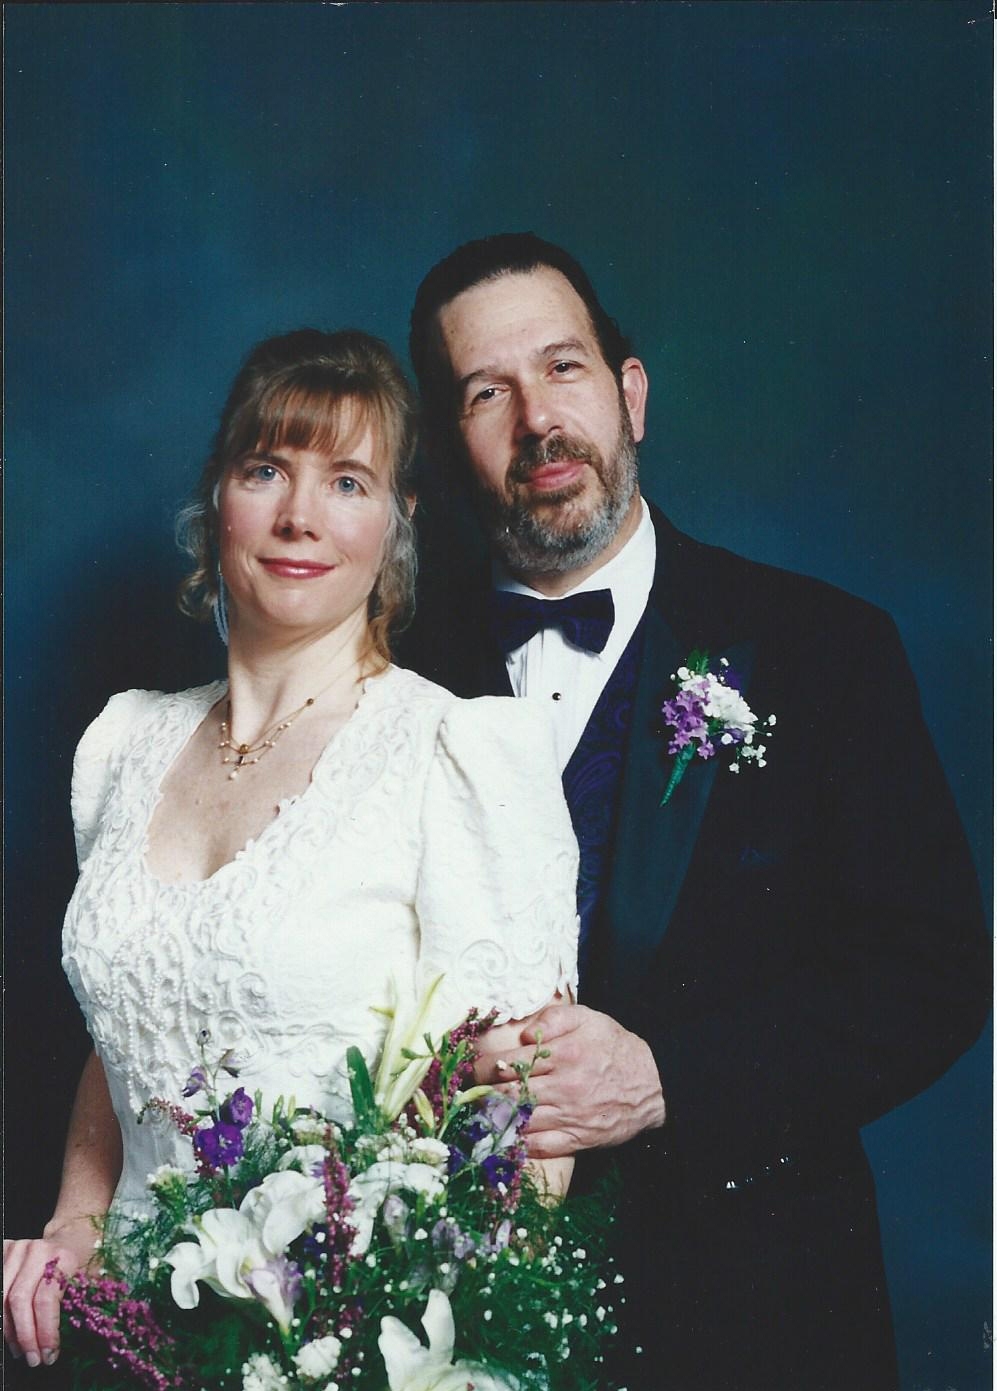 Katy &amp; Dale wedding picture - 11-19-95